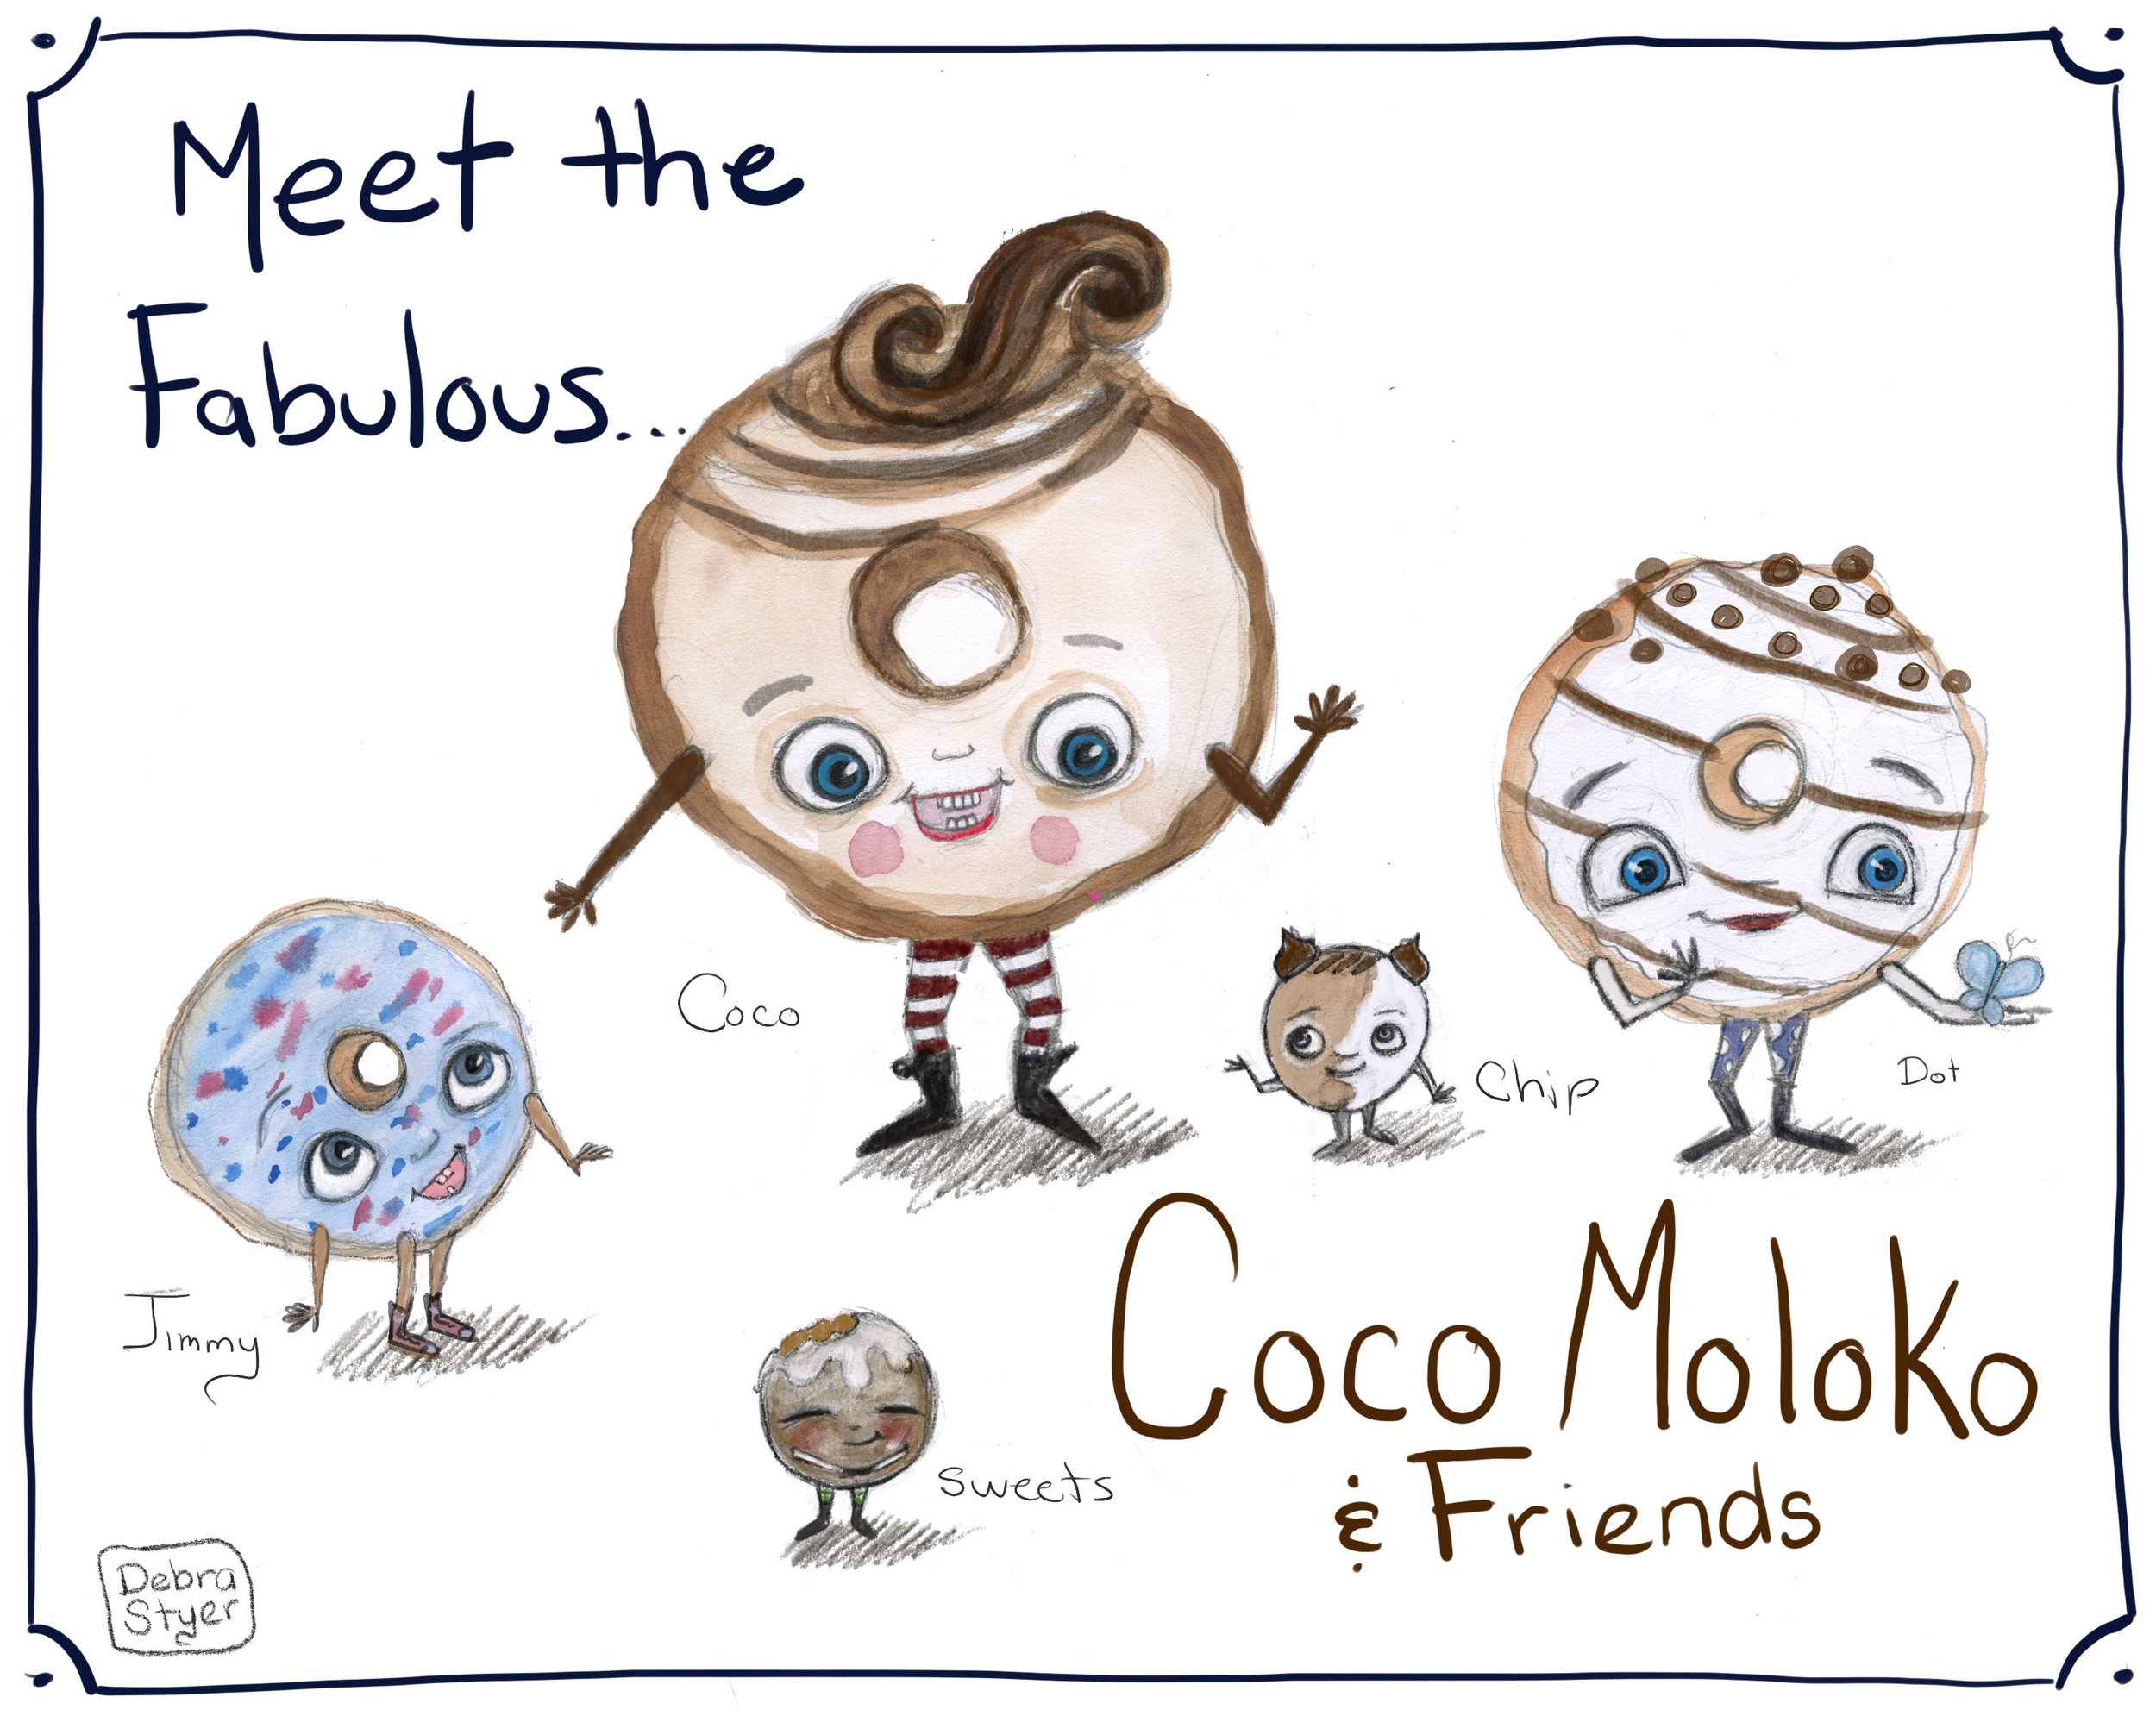 Coco Moloko and Friends .jpg